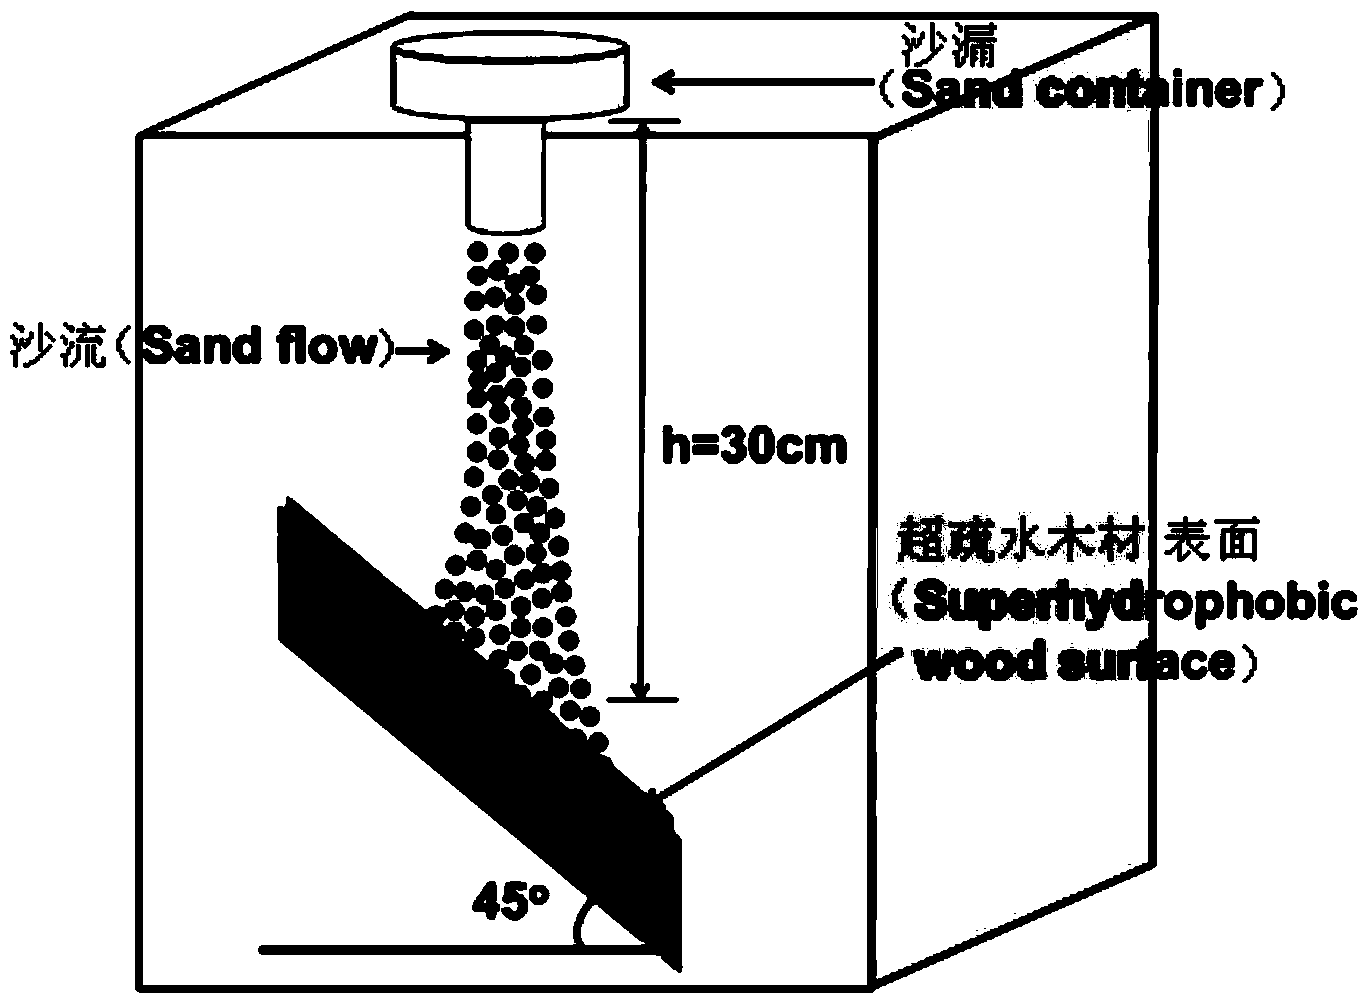 Method for improving mechanical stability of super-hydrophobic wood